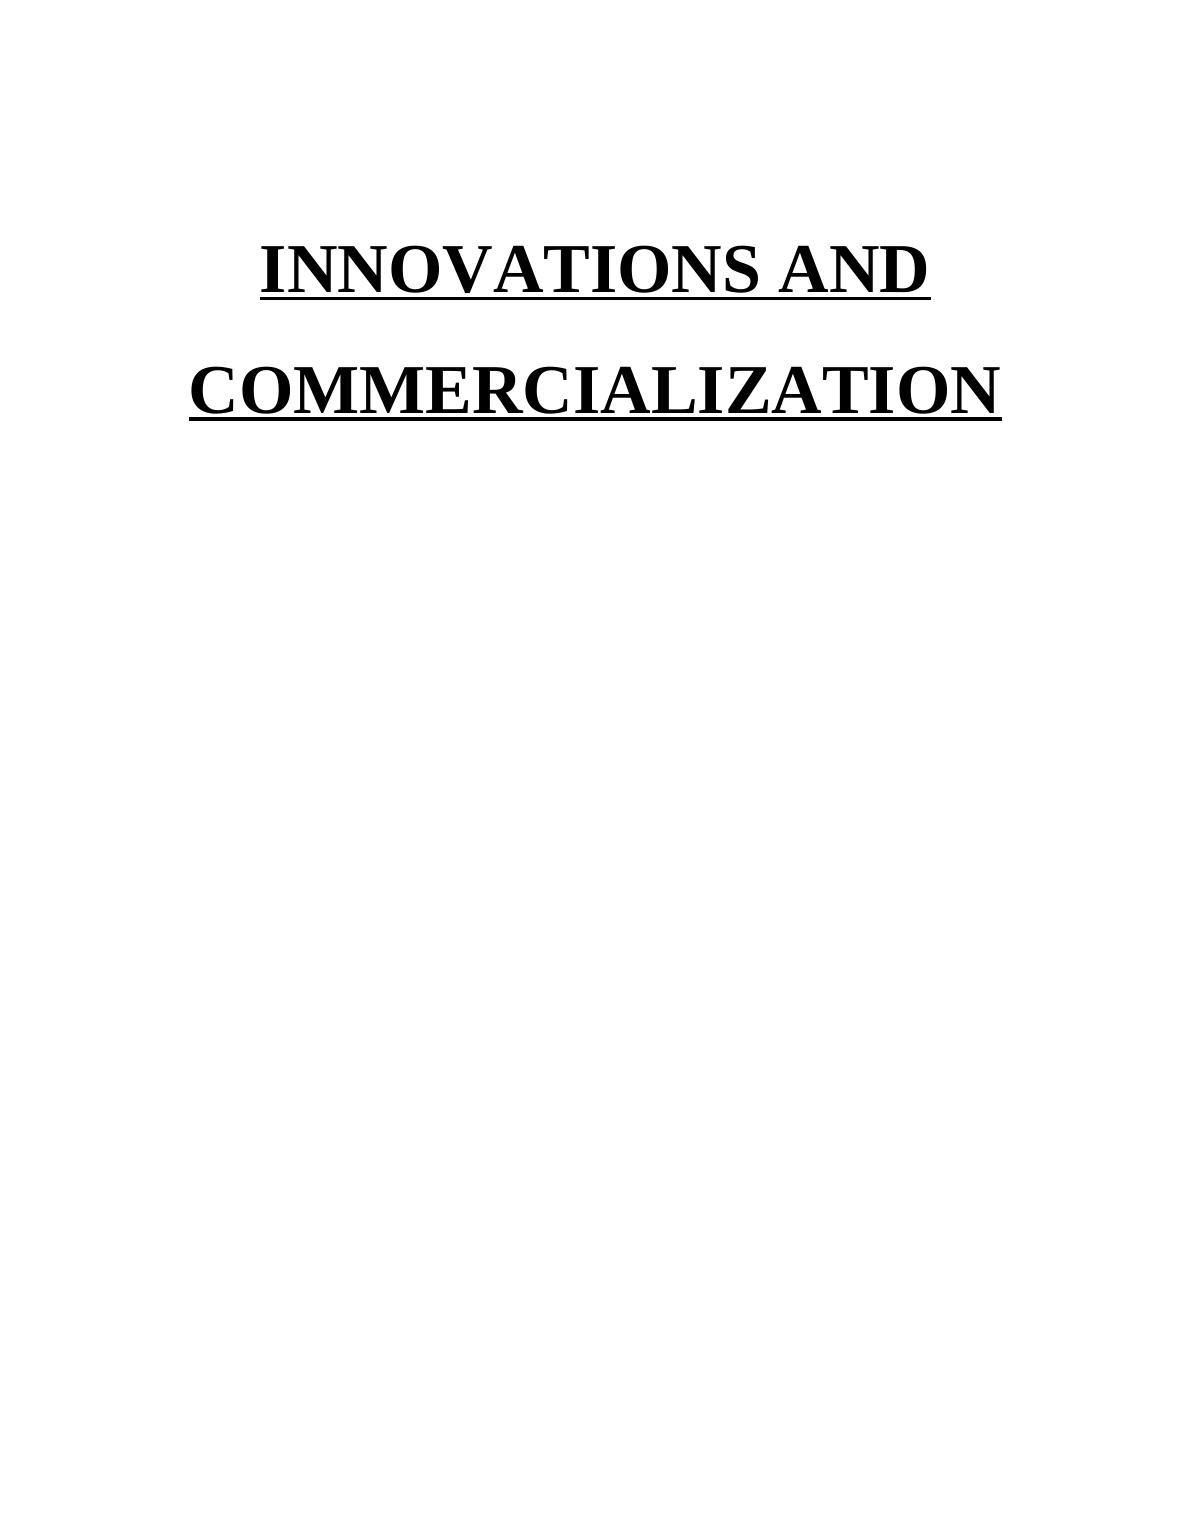 Innovations and Commercialization_1